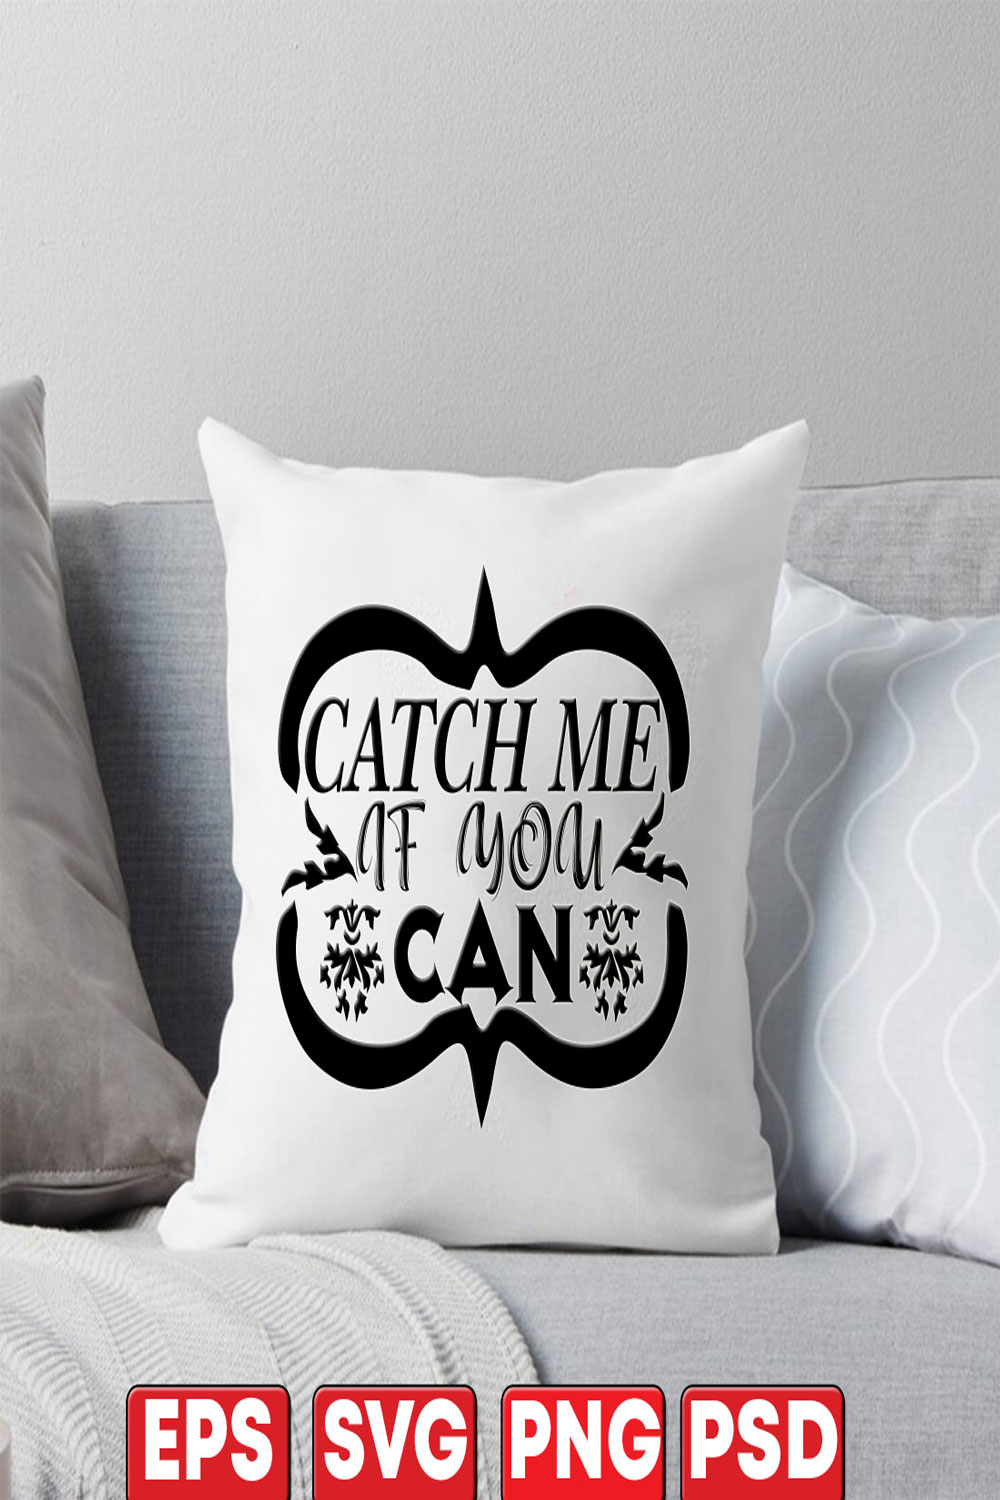 Catch-me-if-you-can pinterest preview image.